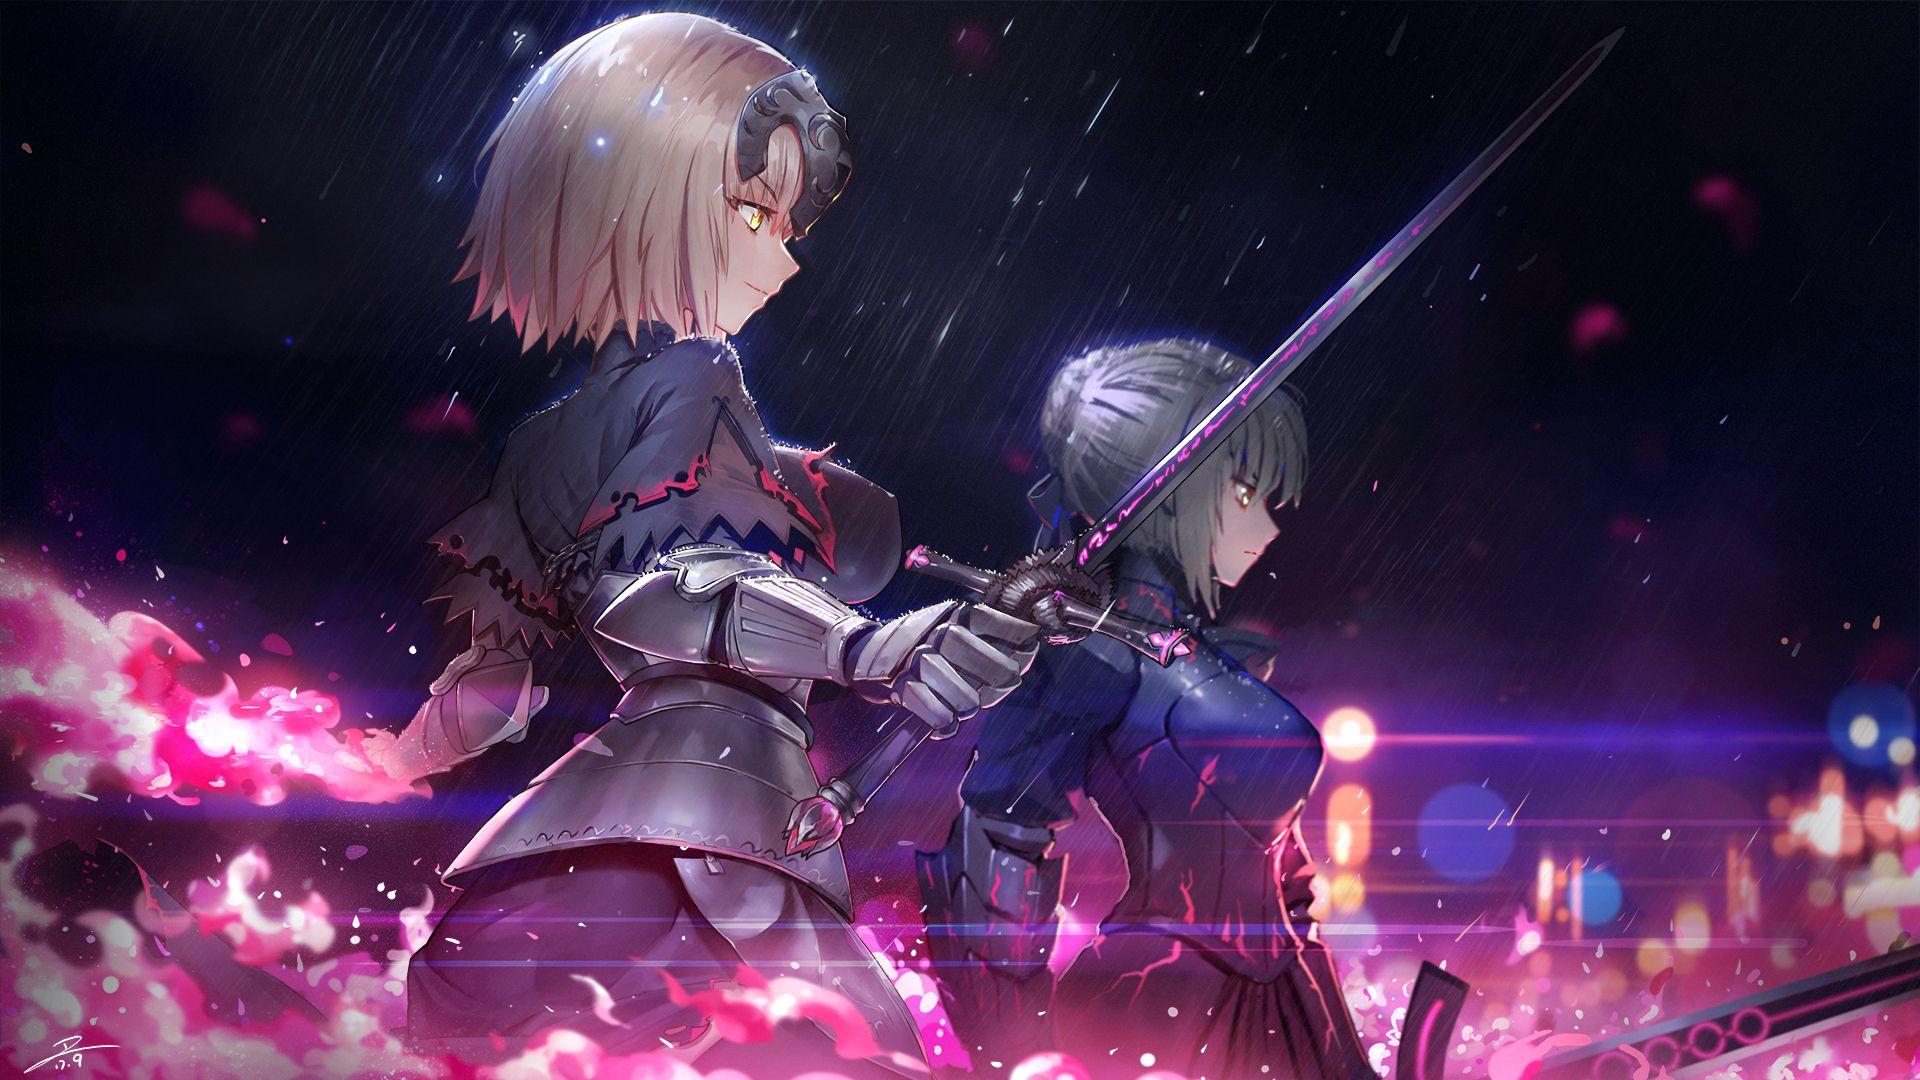 Fate/Grand Order Wallpapers - Wallpaper Cave